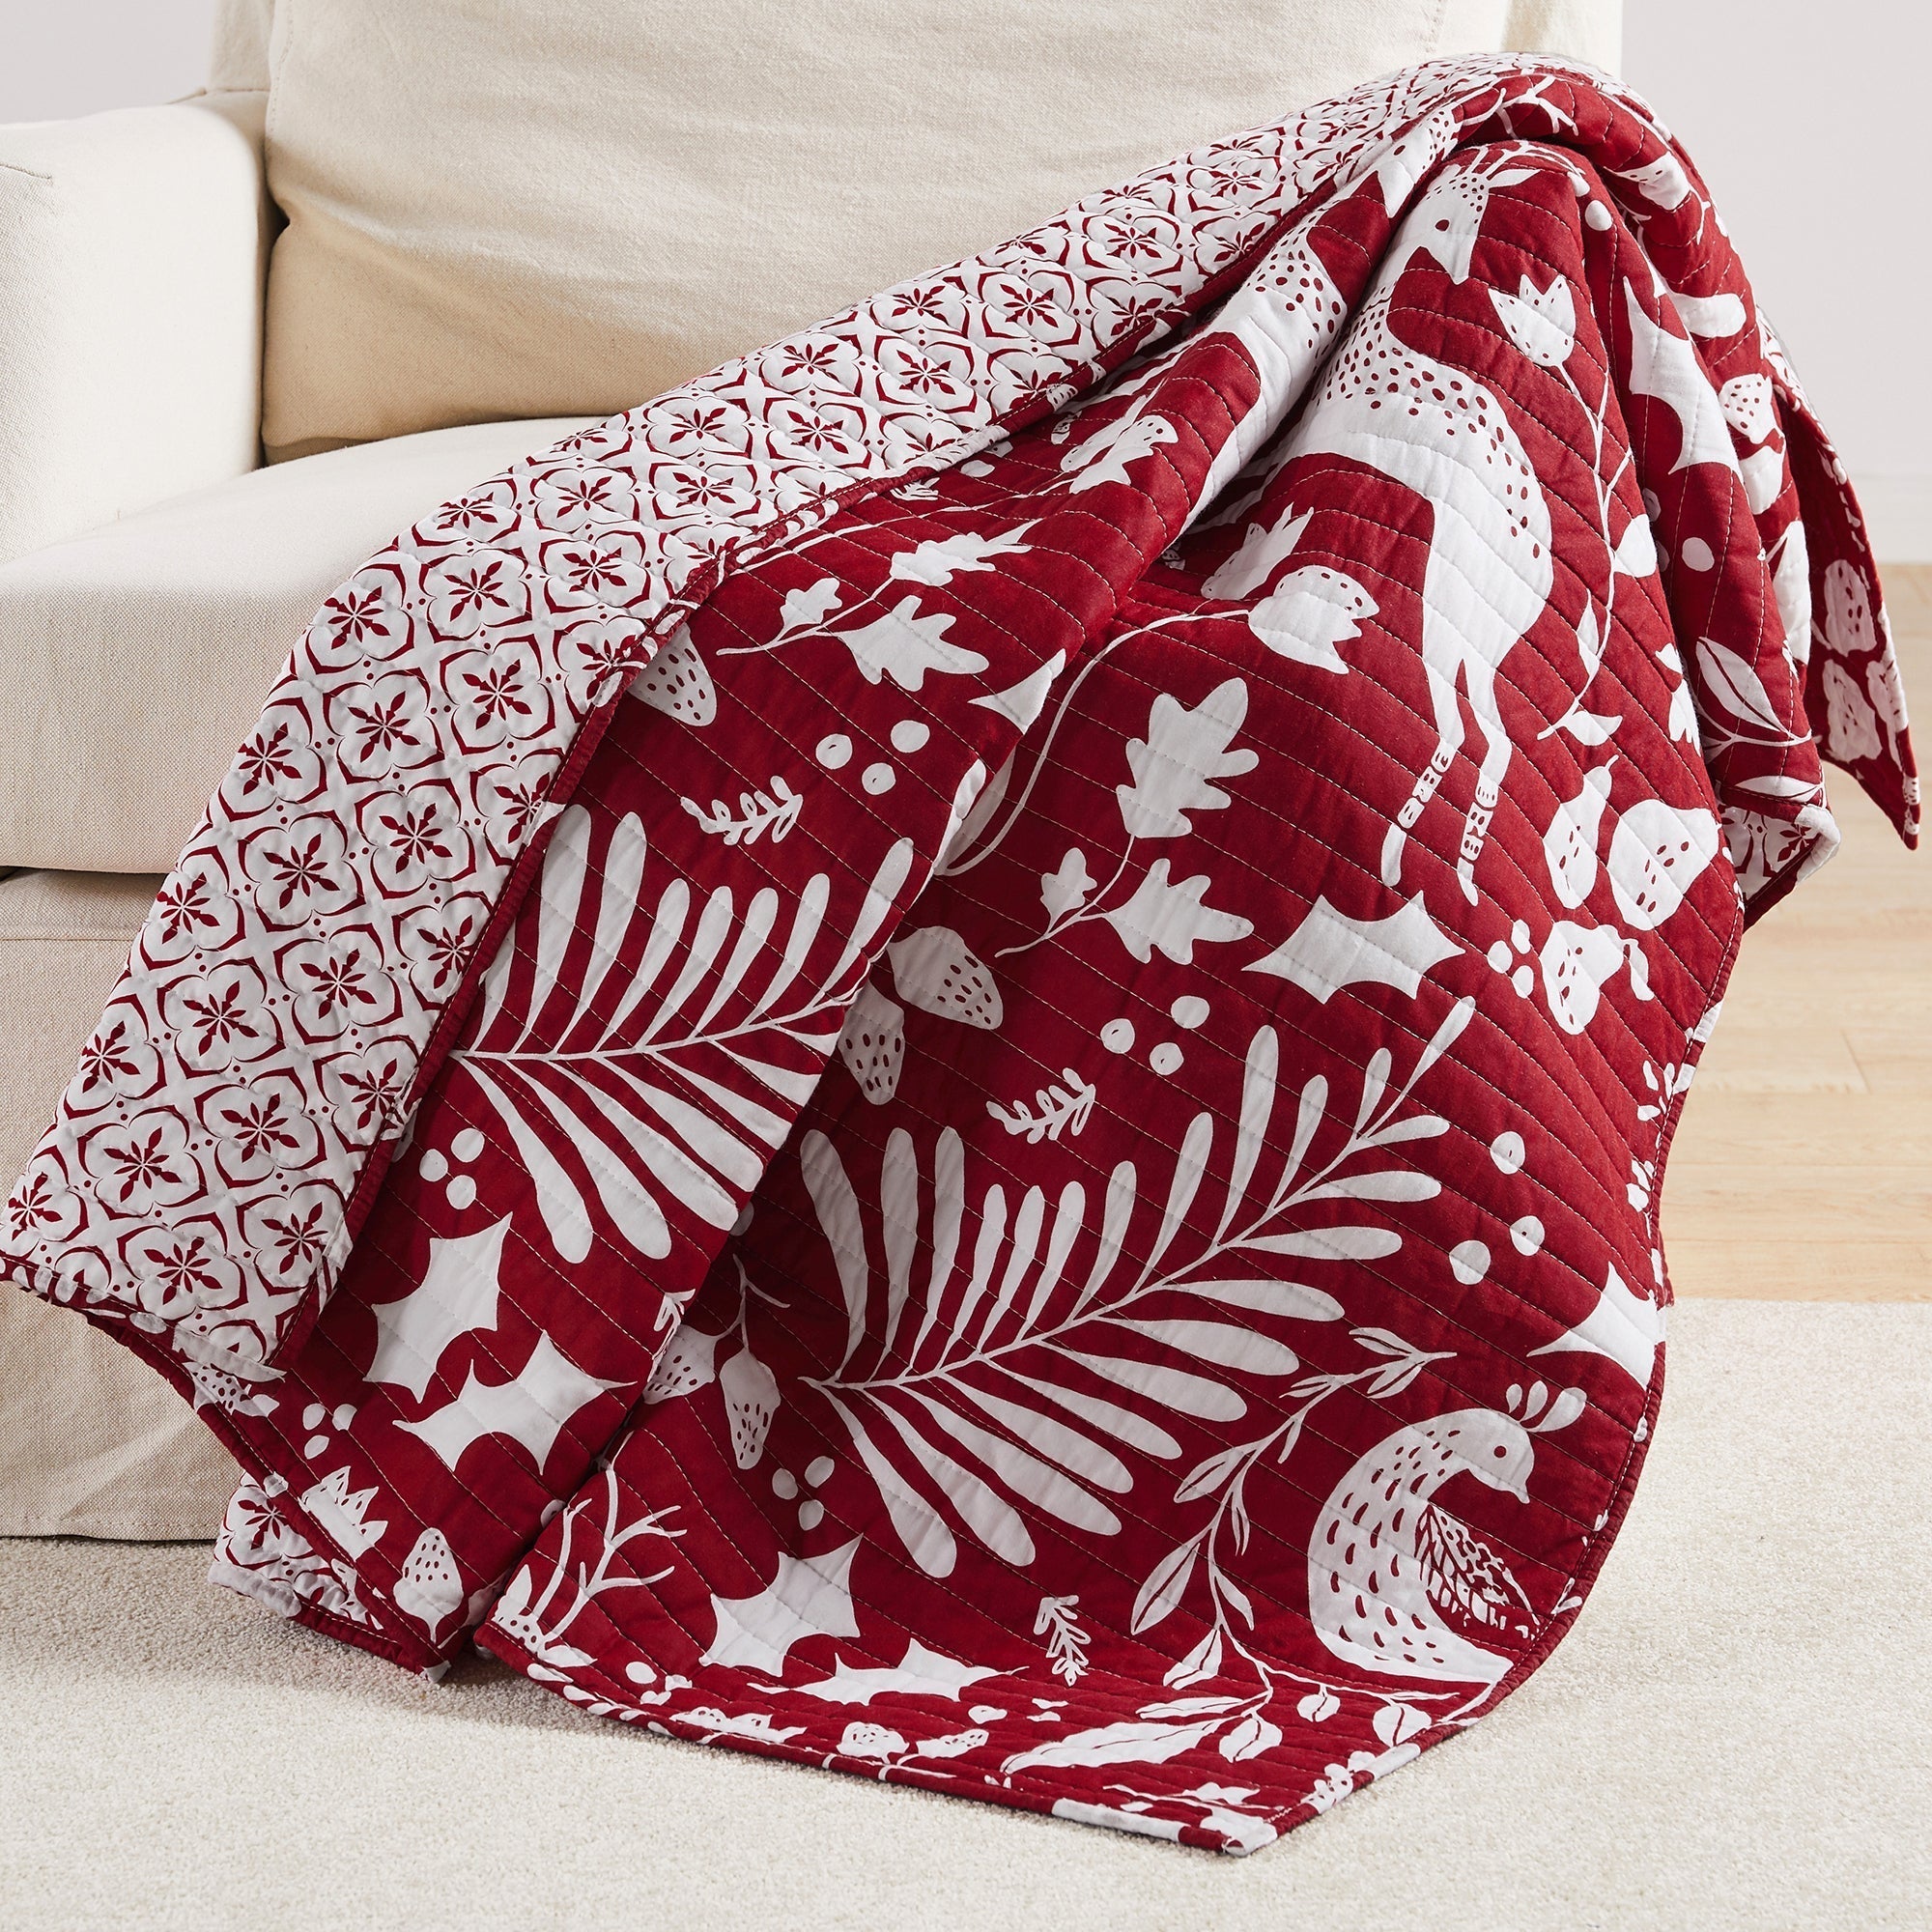 Bretton Woods Quilted throw